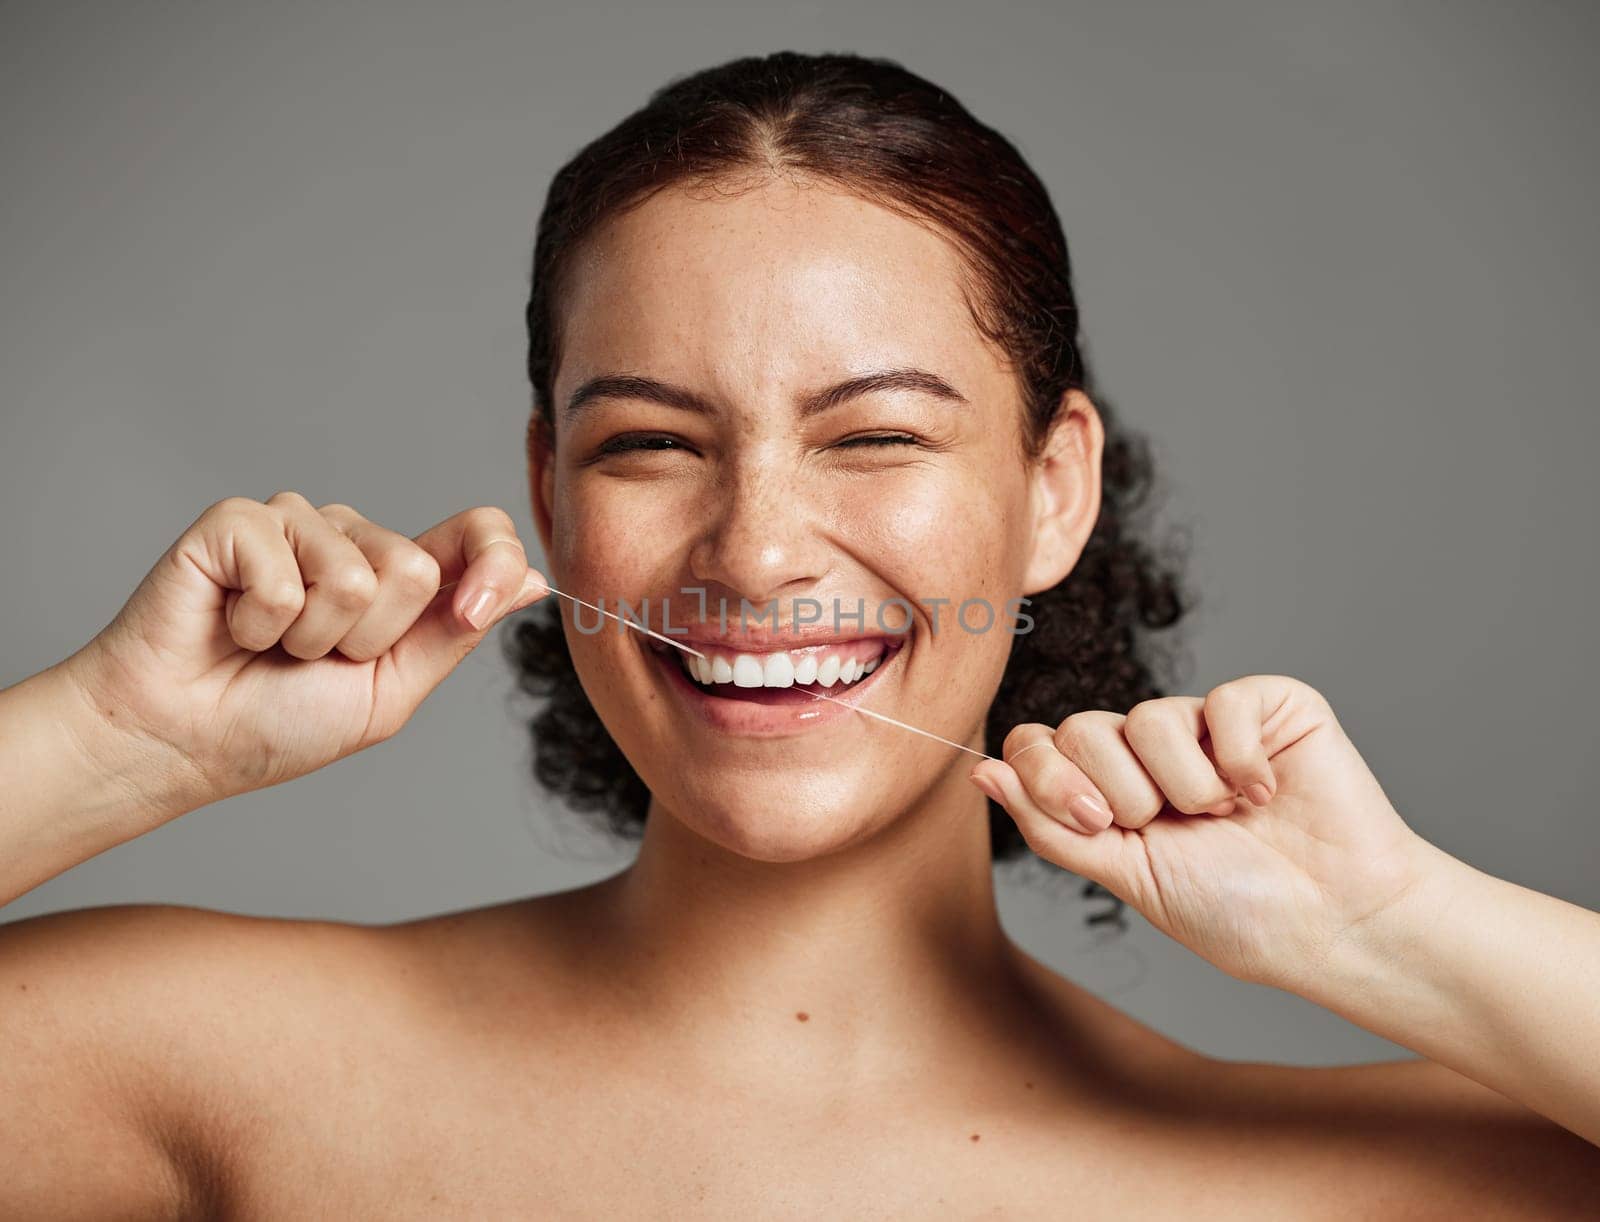 Dental floss, flossing teeth and woman with a smile for oral hygiene, health and wellness on studio background. Face of a happy female during self care, healthcare and grooming for a healthy mouth by YuriArcurs